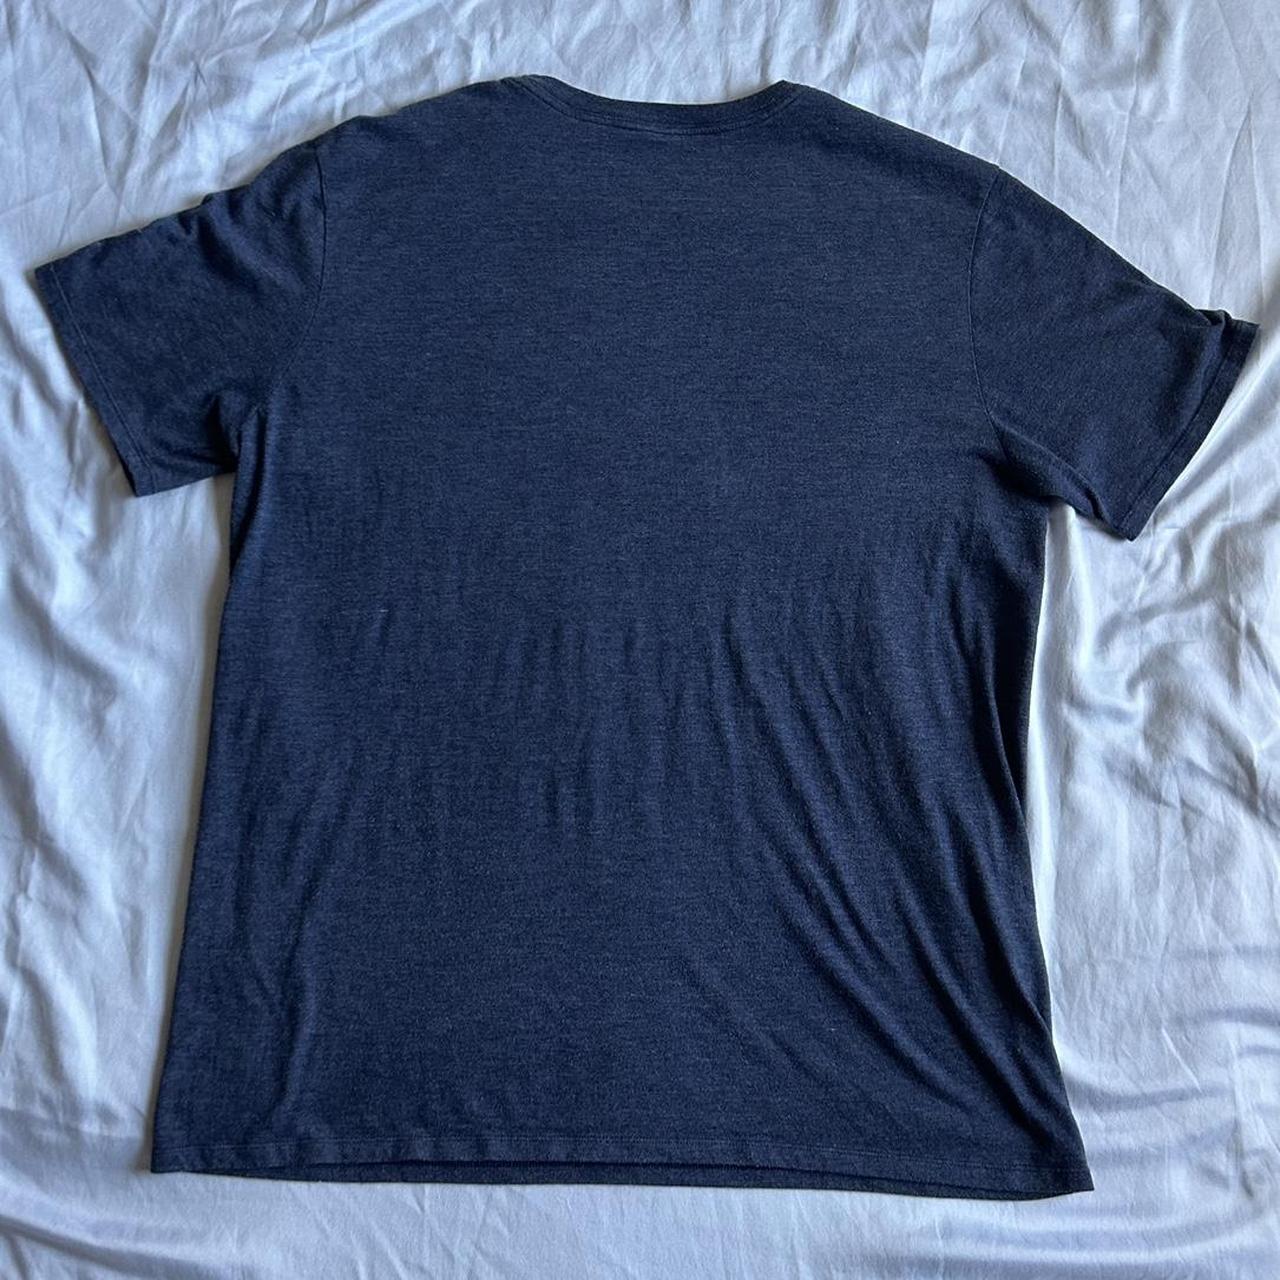 Nike Men's Navy and Blue T-shirt (2)